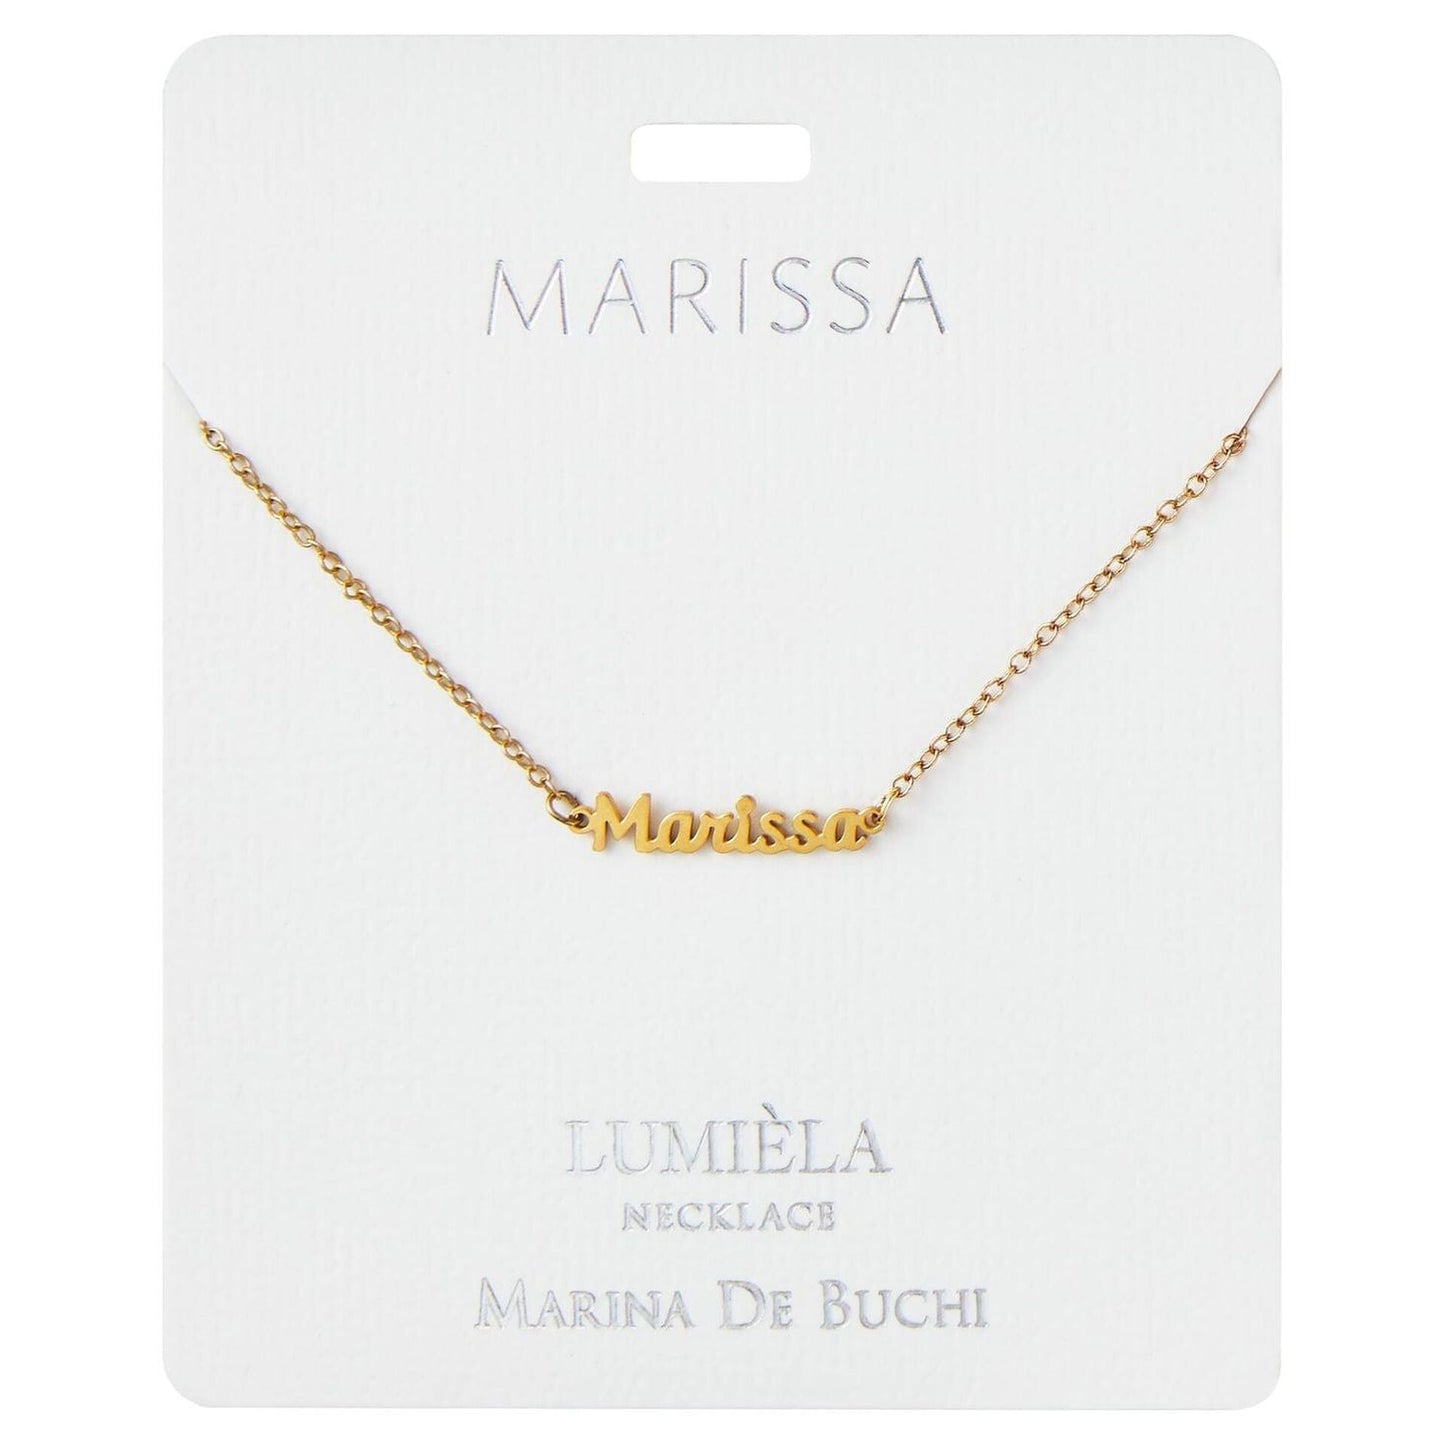 Lumiela Personalized Nameplate Maggie Necklace in Gold Tone